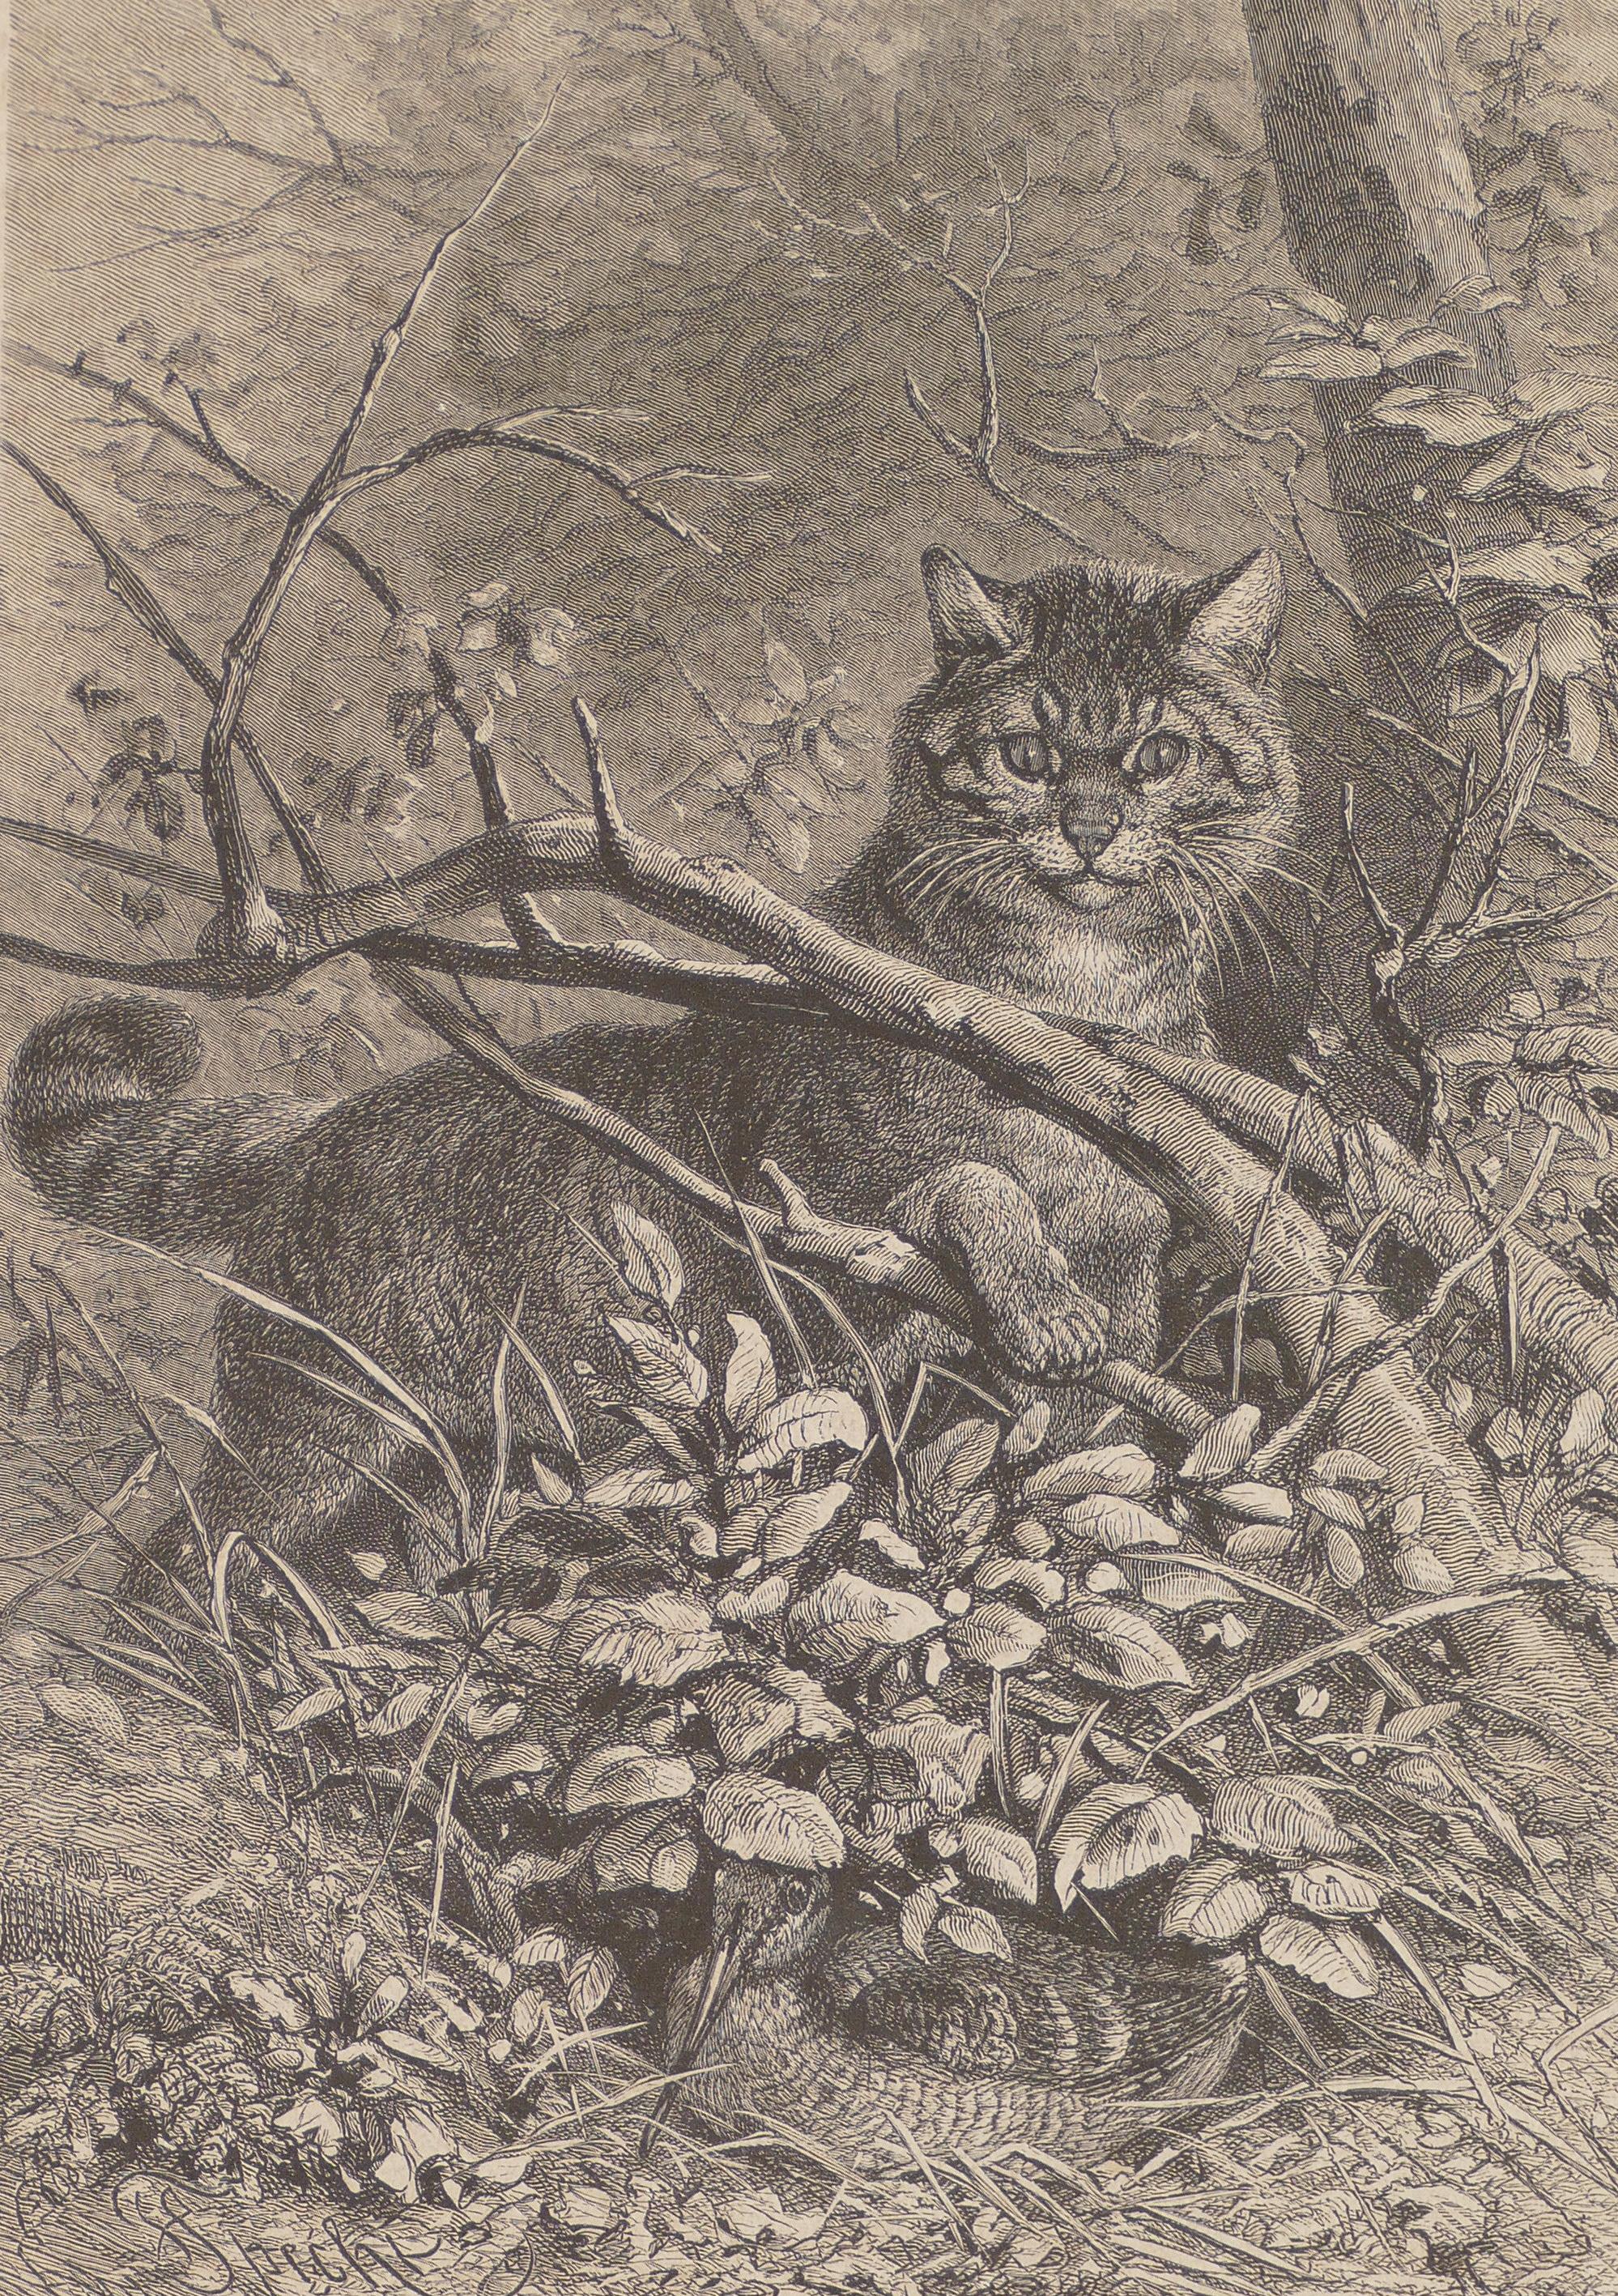 Unknown Animal Print - A Cat Hidden in the Tree - Original Lithograph - 1880